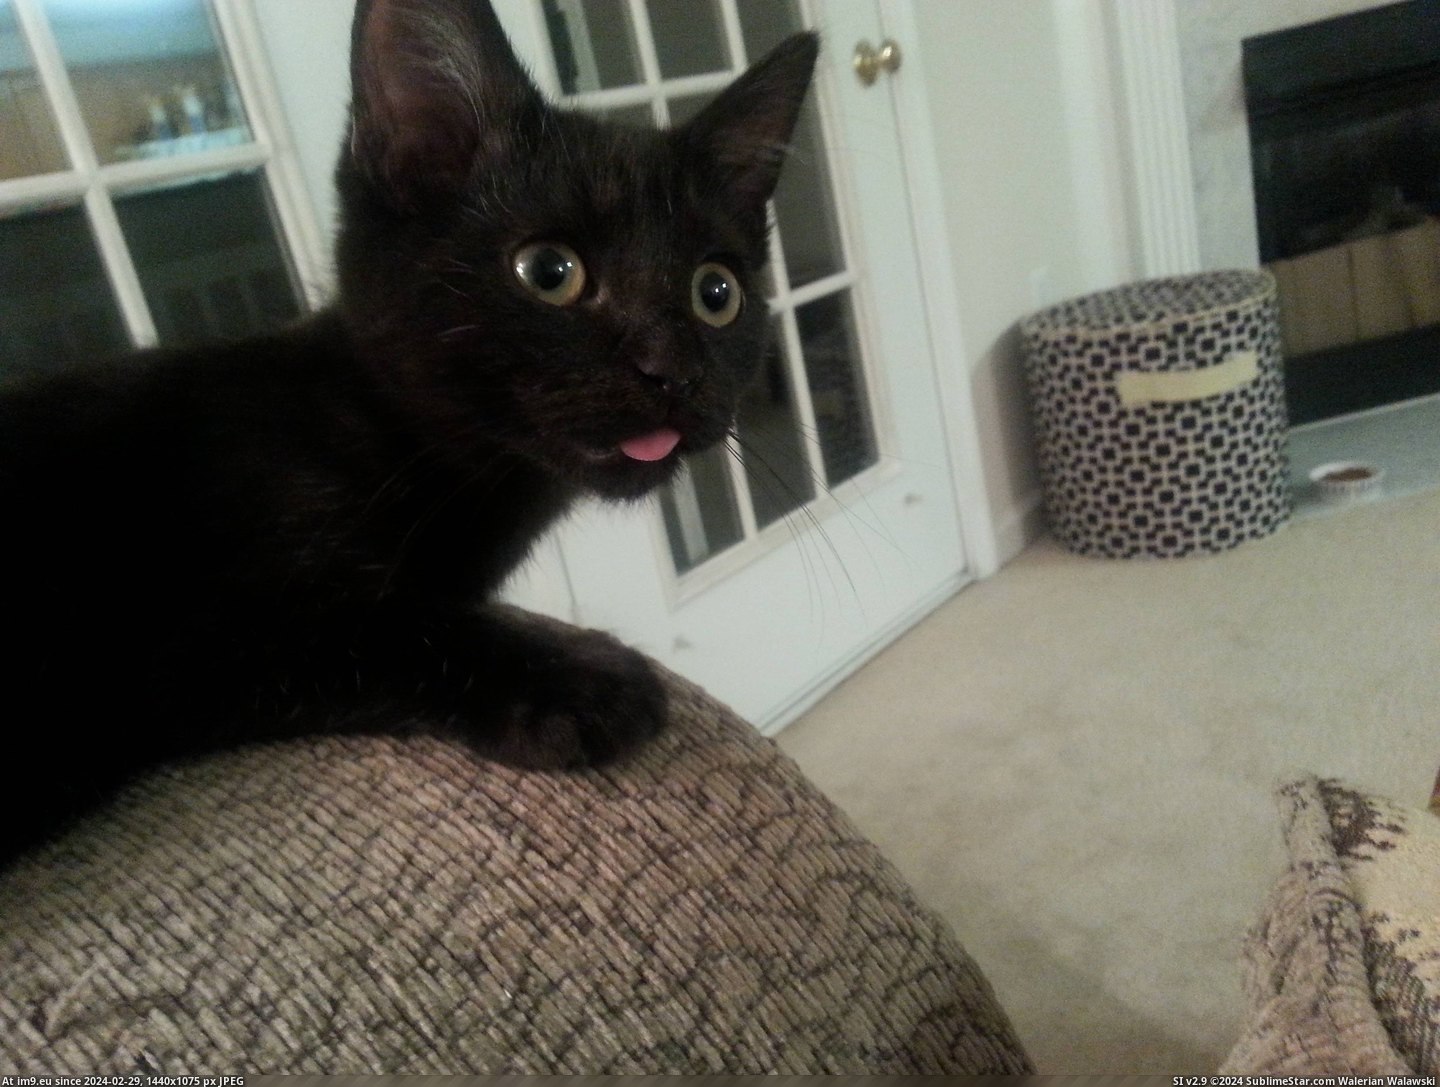 #Kitten #Tongue #Complete #Did [Aww] My kitten did this with his tongue and now I am complete. Pic. (Bild von album My r/AWW favs))